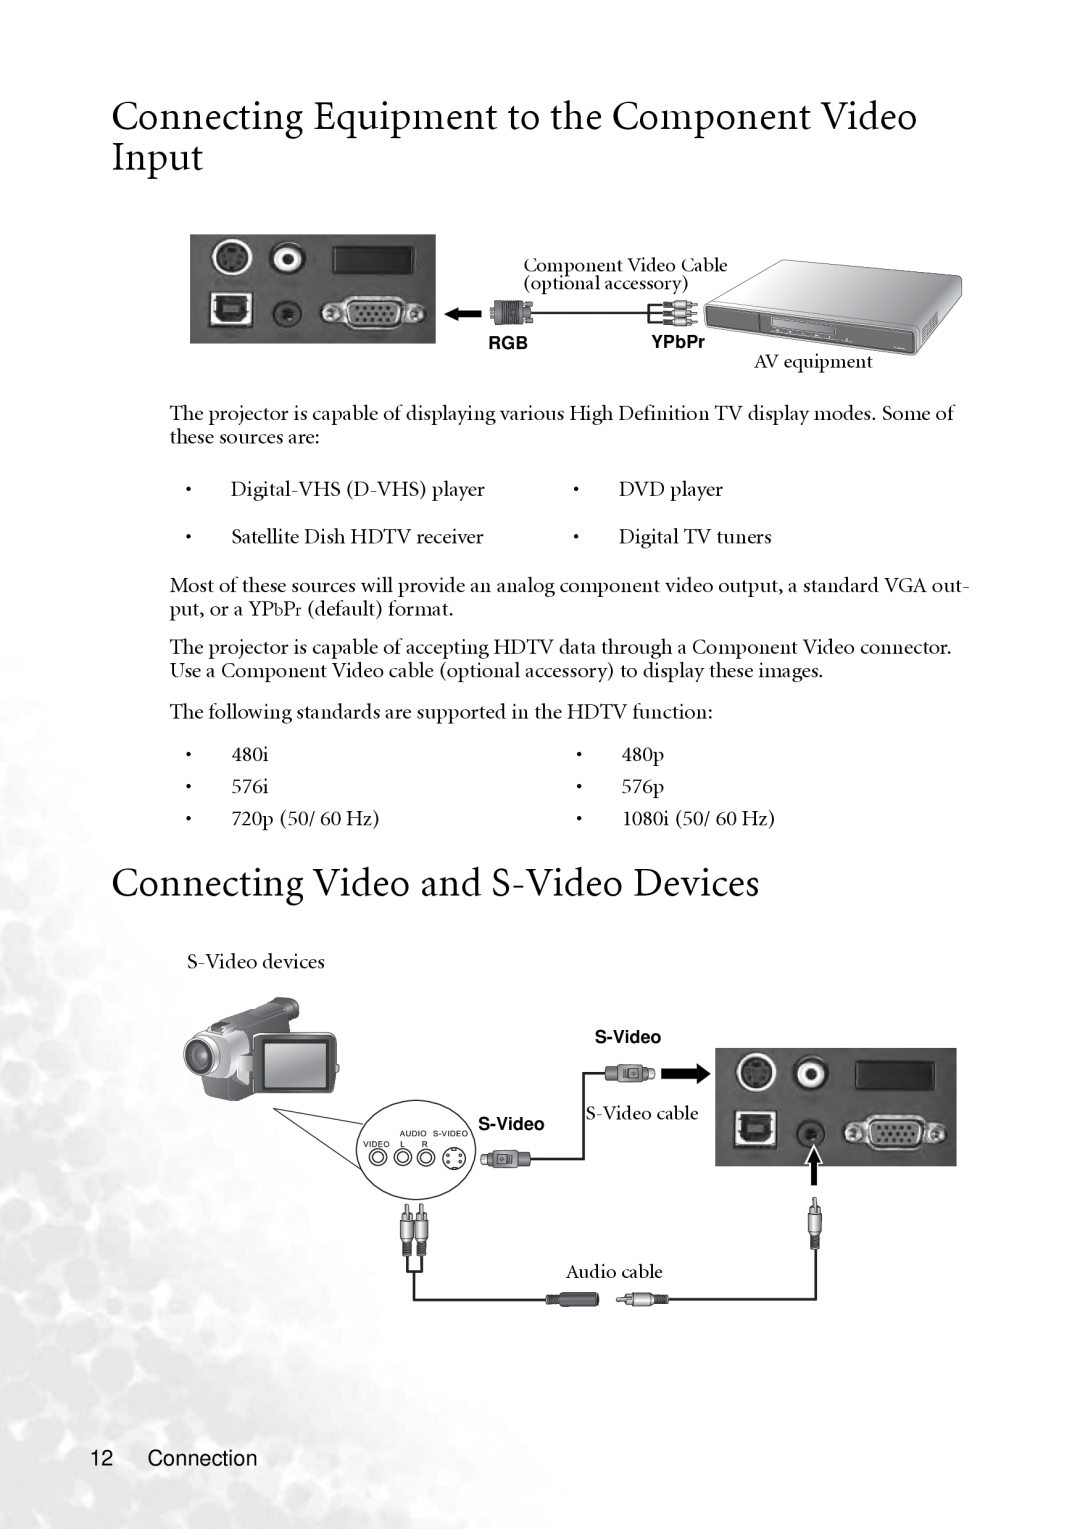 BenQ PB2240 Connecting Equipment to the Component Video Input, Connecting Video and S-Video Devices, 1080i 50/ 60 Hz 